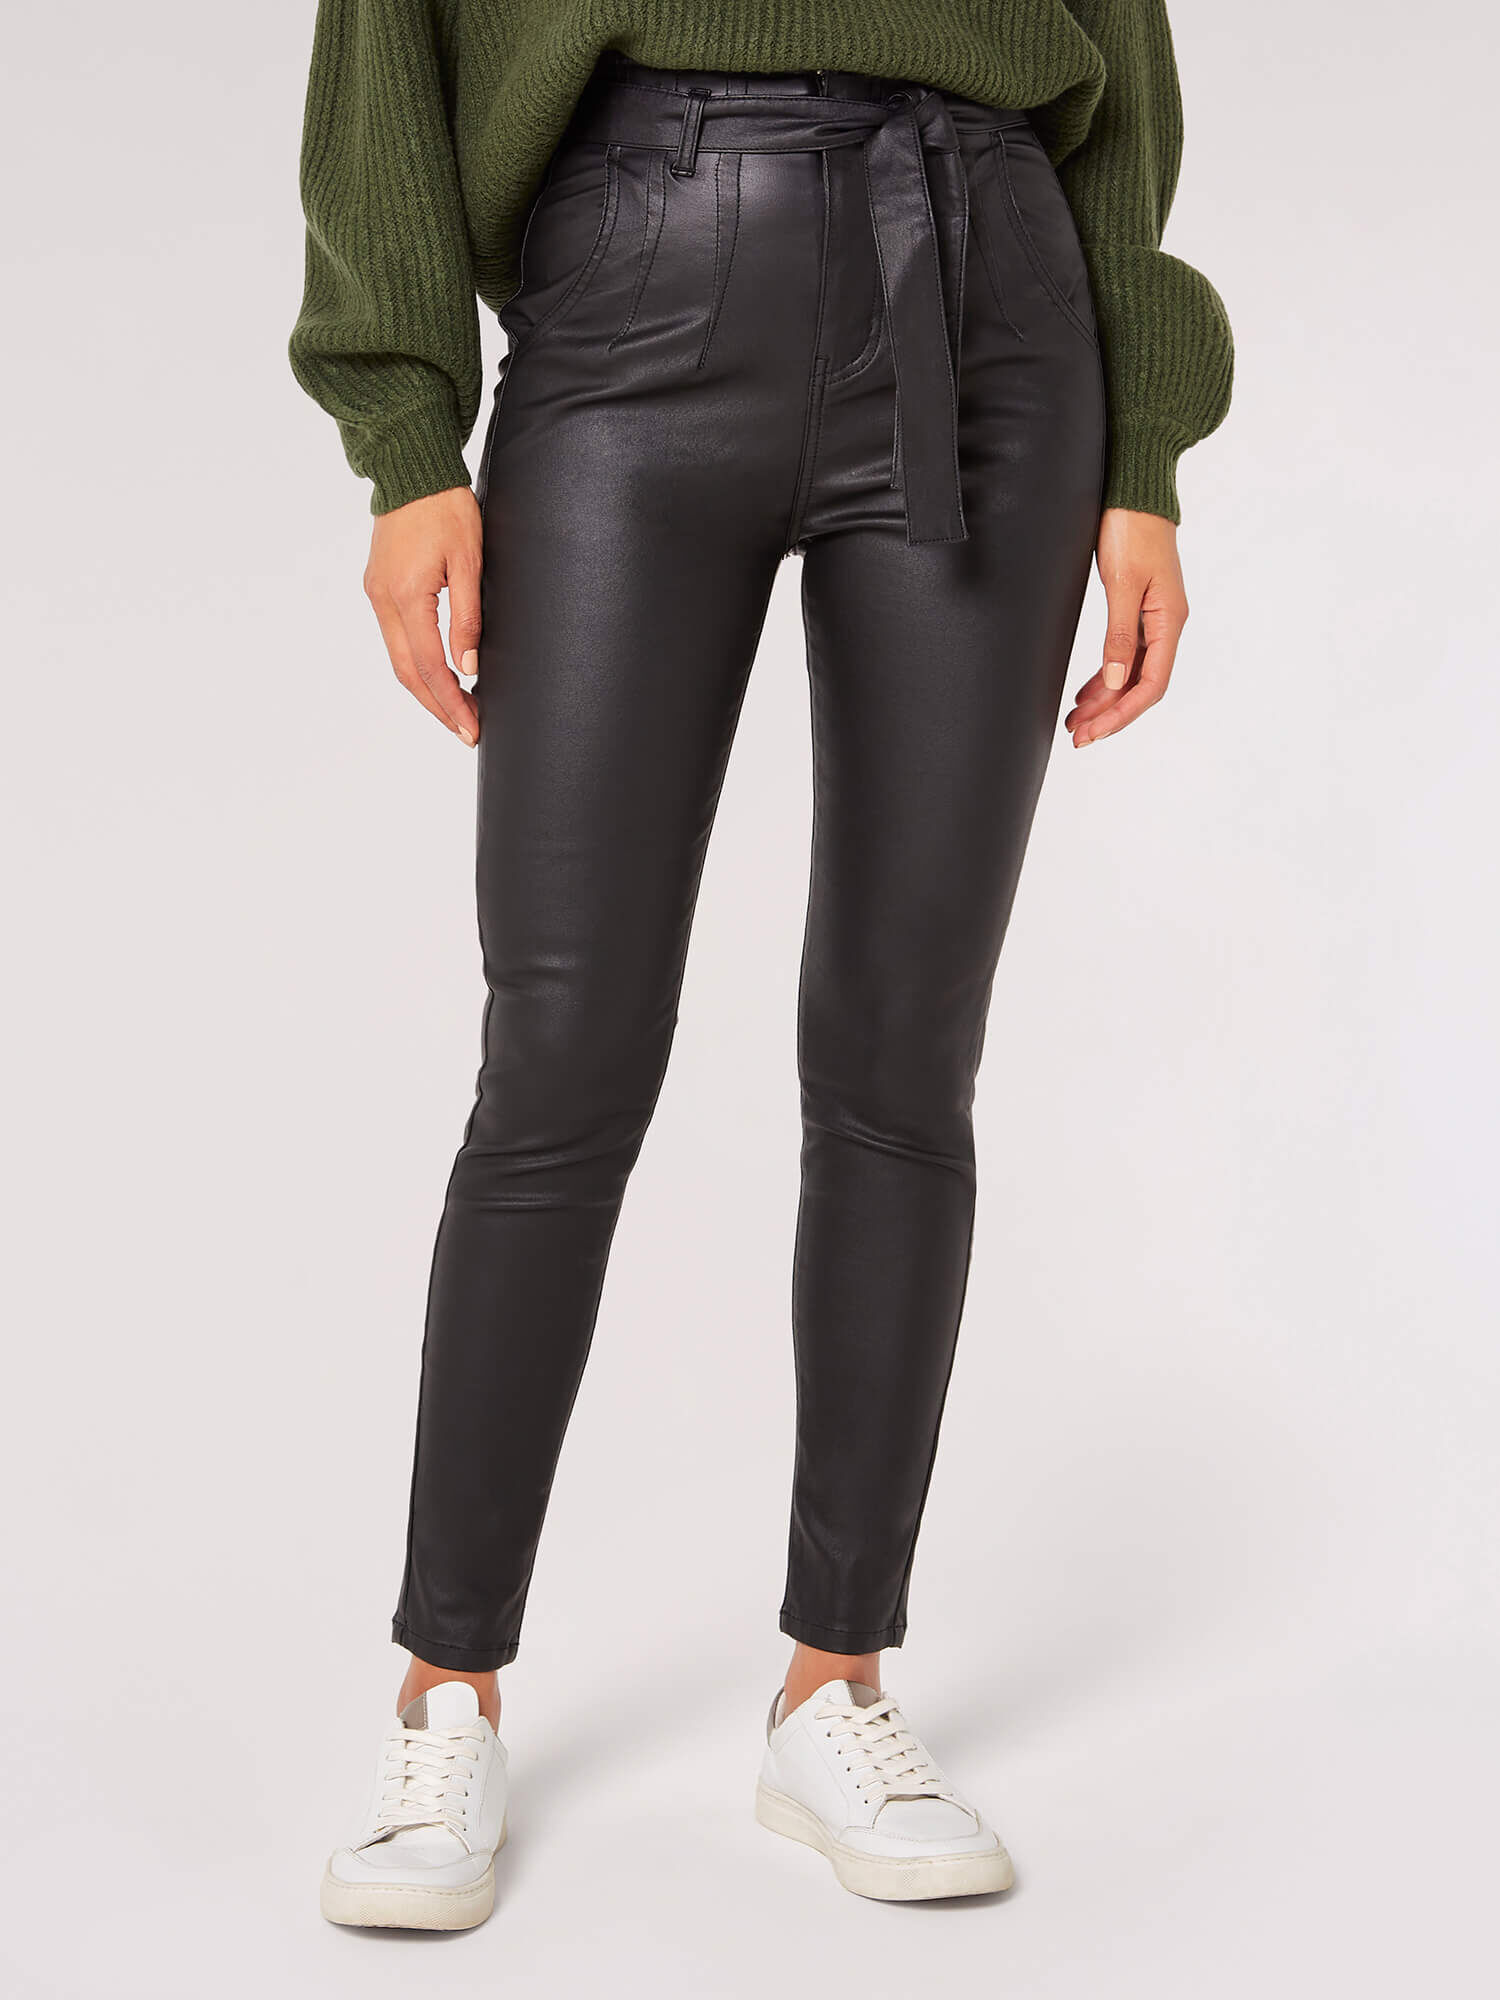 AX Paris Black Faux Leather Straight Leg Belted Trousers | very.co.uk